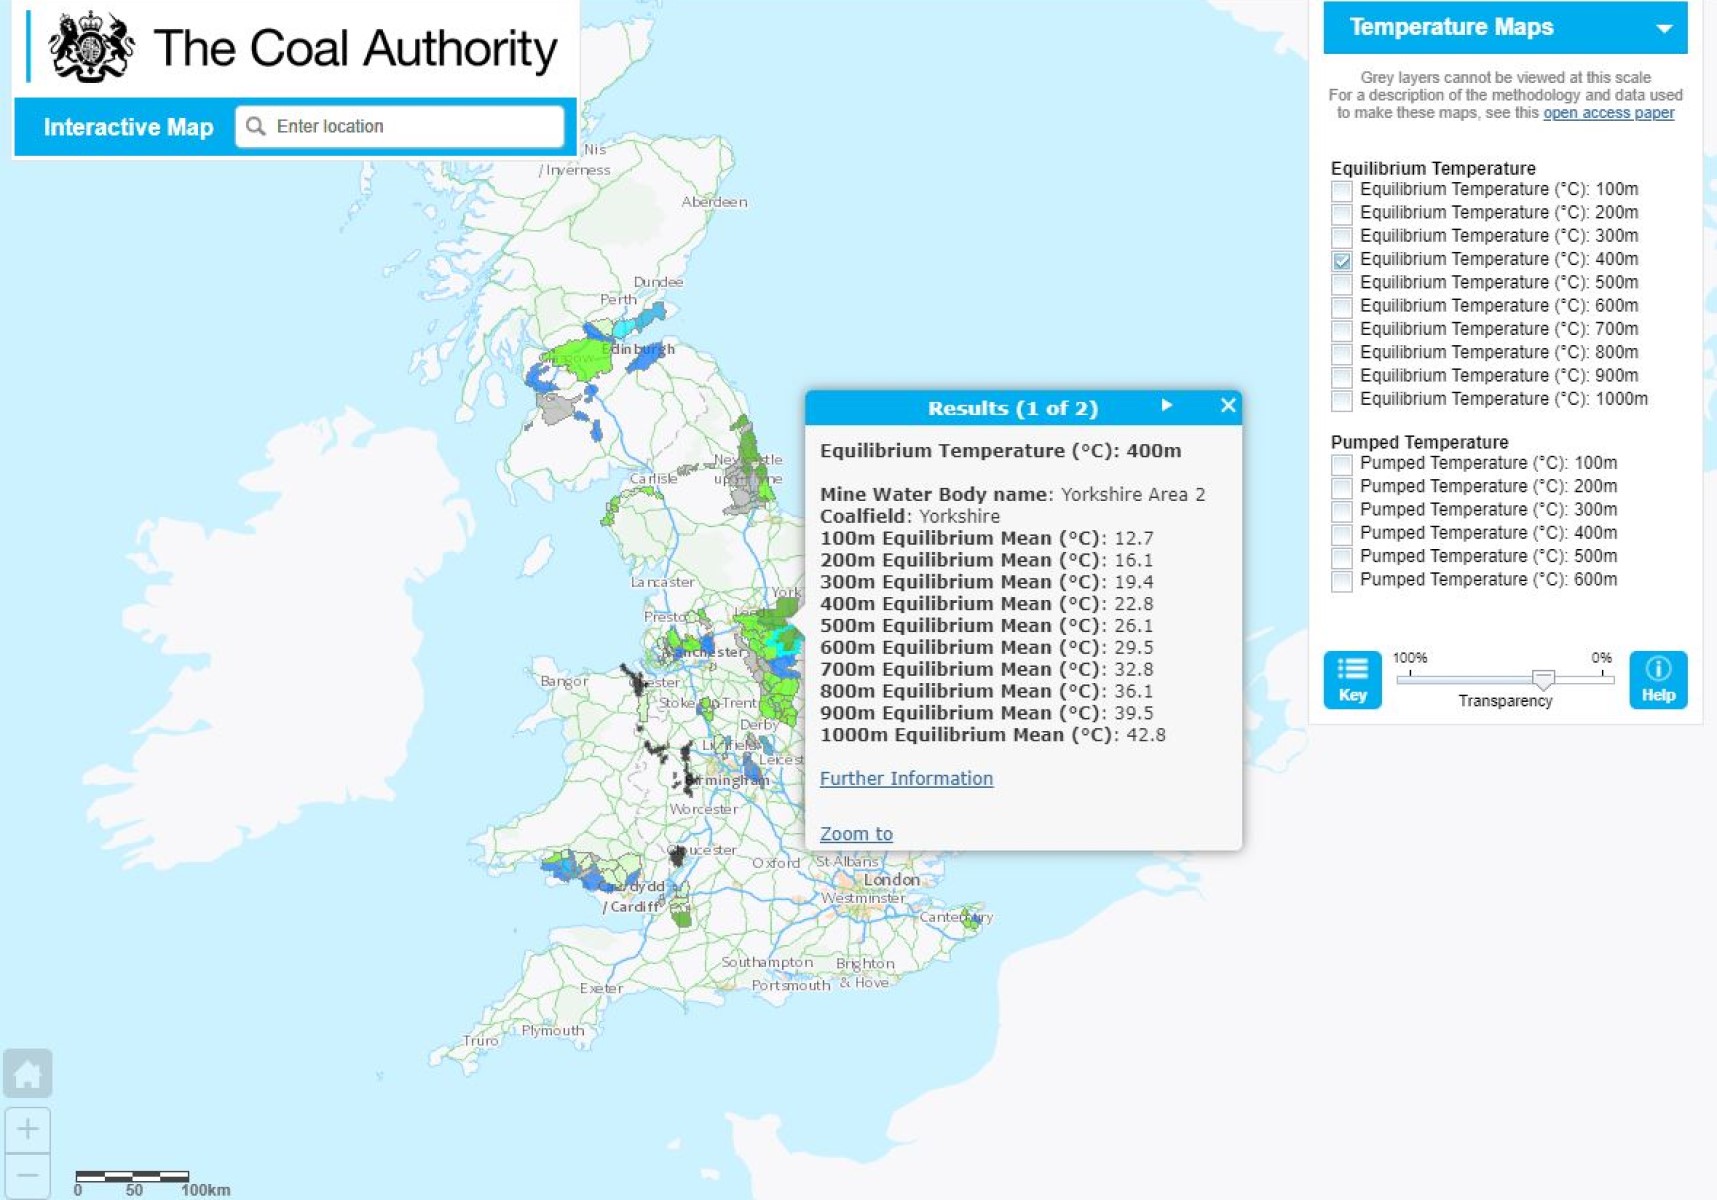 Coal Authority Viewer showing temperatures at 400m below the ground in British Coalfields.